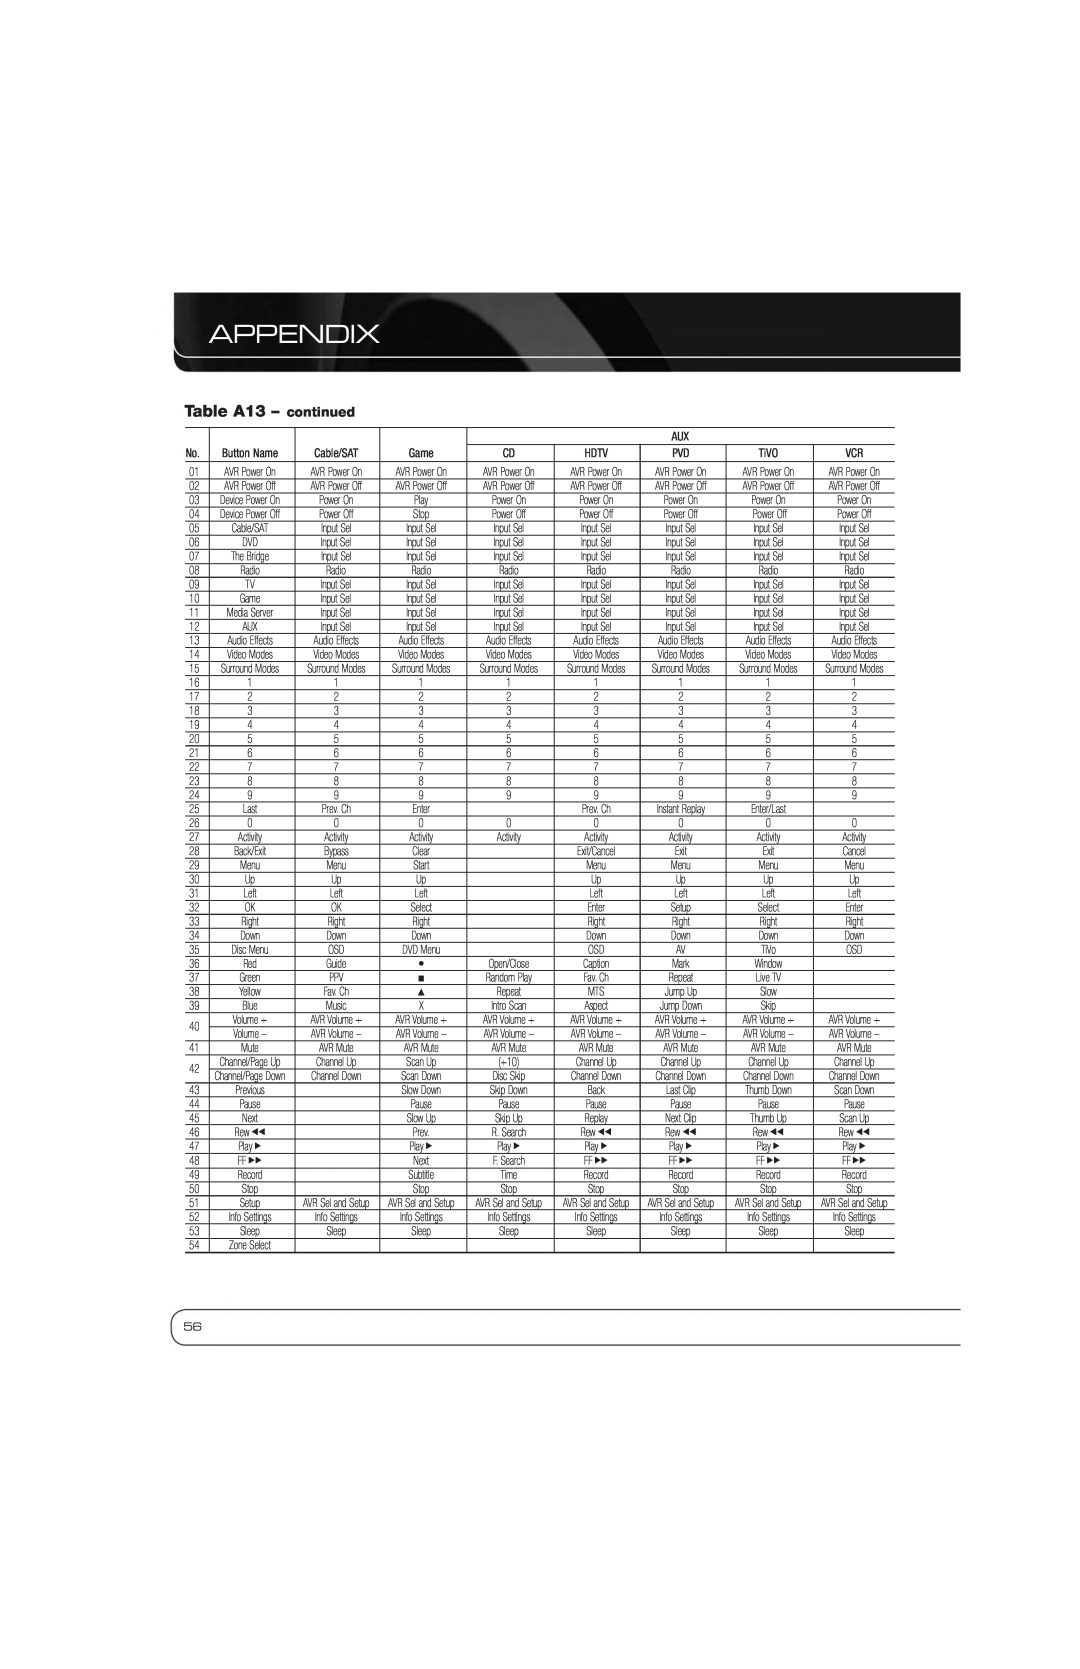 Harman AVR 2600 owner manual Table A13 - continued, Appendix 